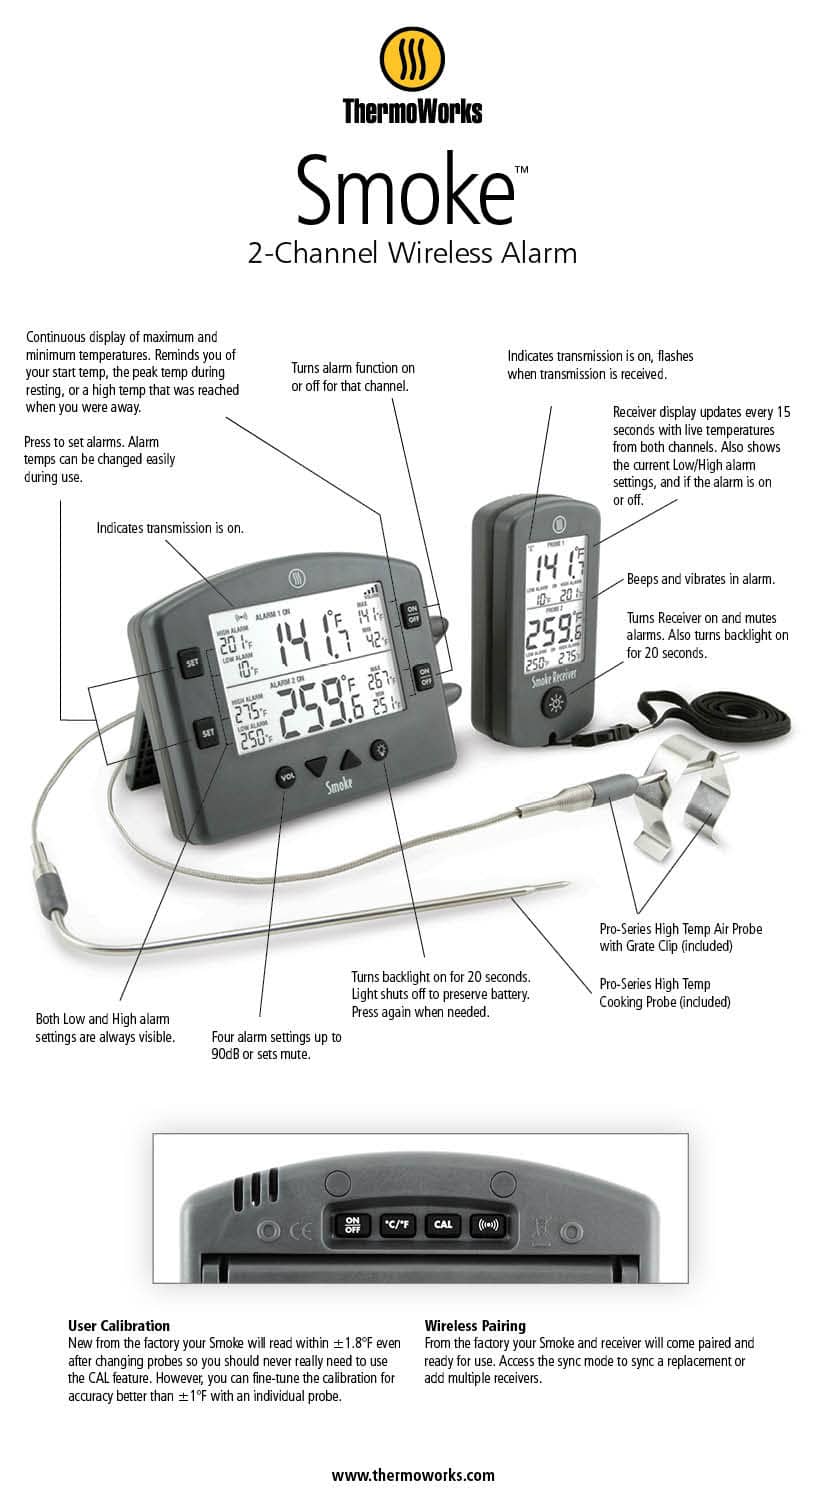 WBT700 Cooking Thermometer with wireless remote pager